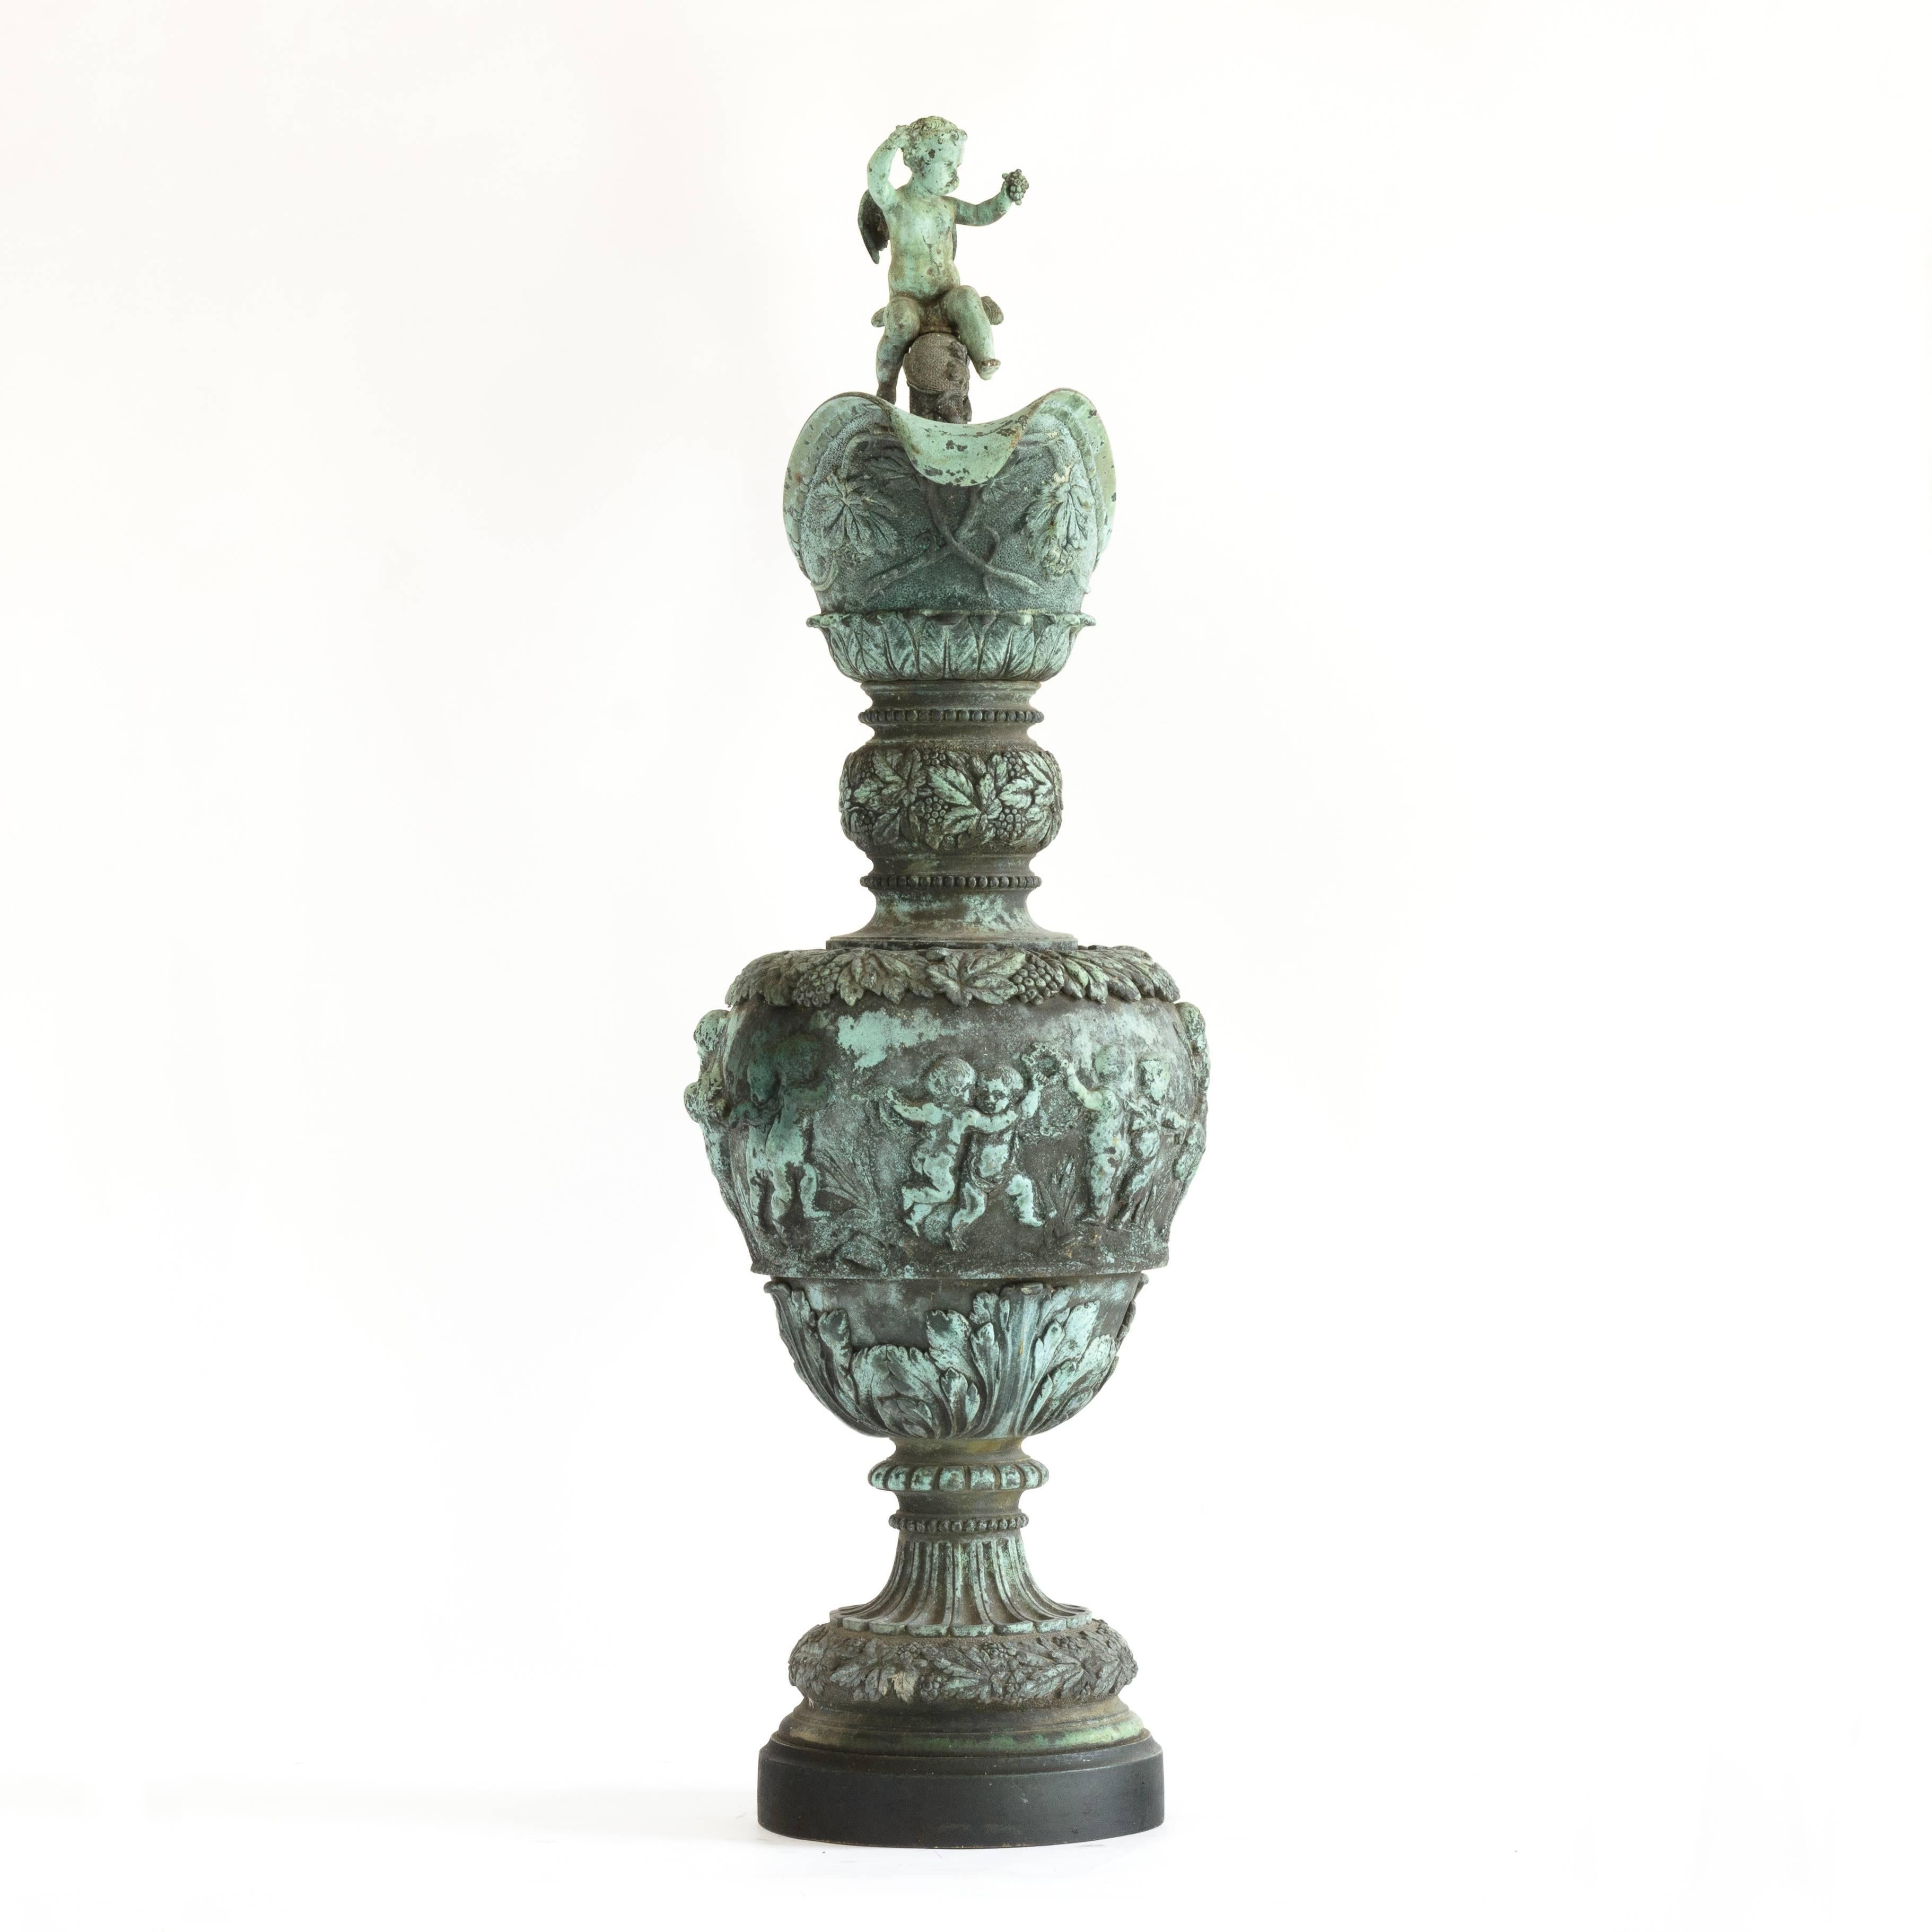 French mid-19th century bronze ewer, exhibited at The Great Exhibition of 1851, the design attributed to Villemsens of Paris, in the Renaissance style, the bulbous body cast with bacchanalian scenes of frolicking putti, the elaborate handle